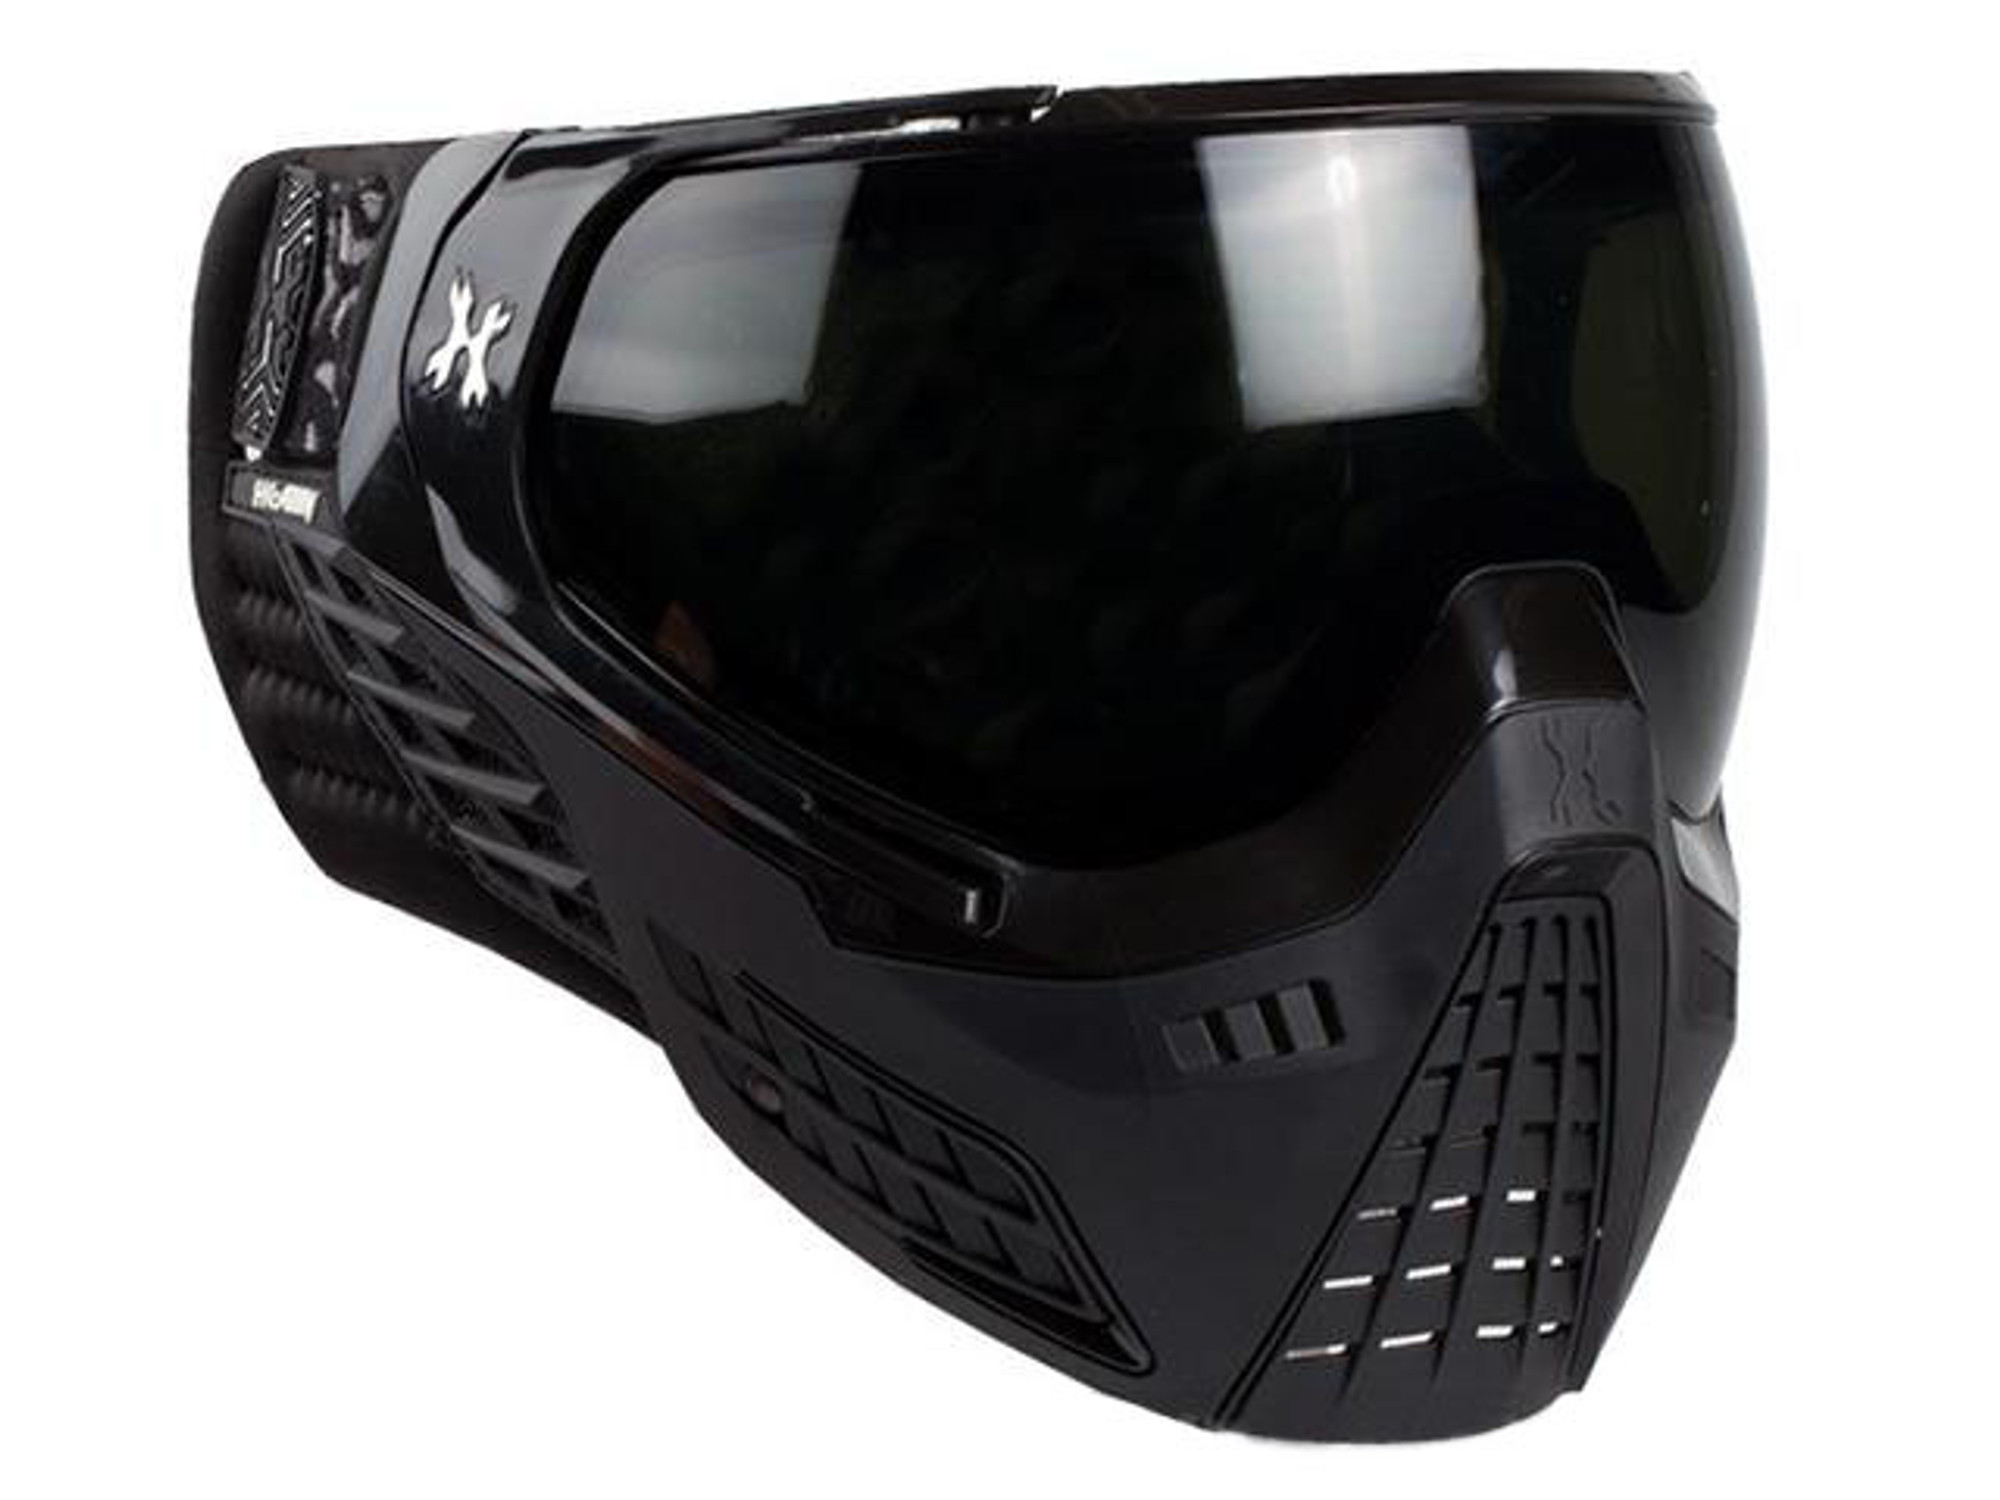 HK Army KLR Full Seal Airsoft/Paintball Mask - Onyx